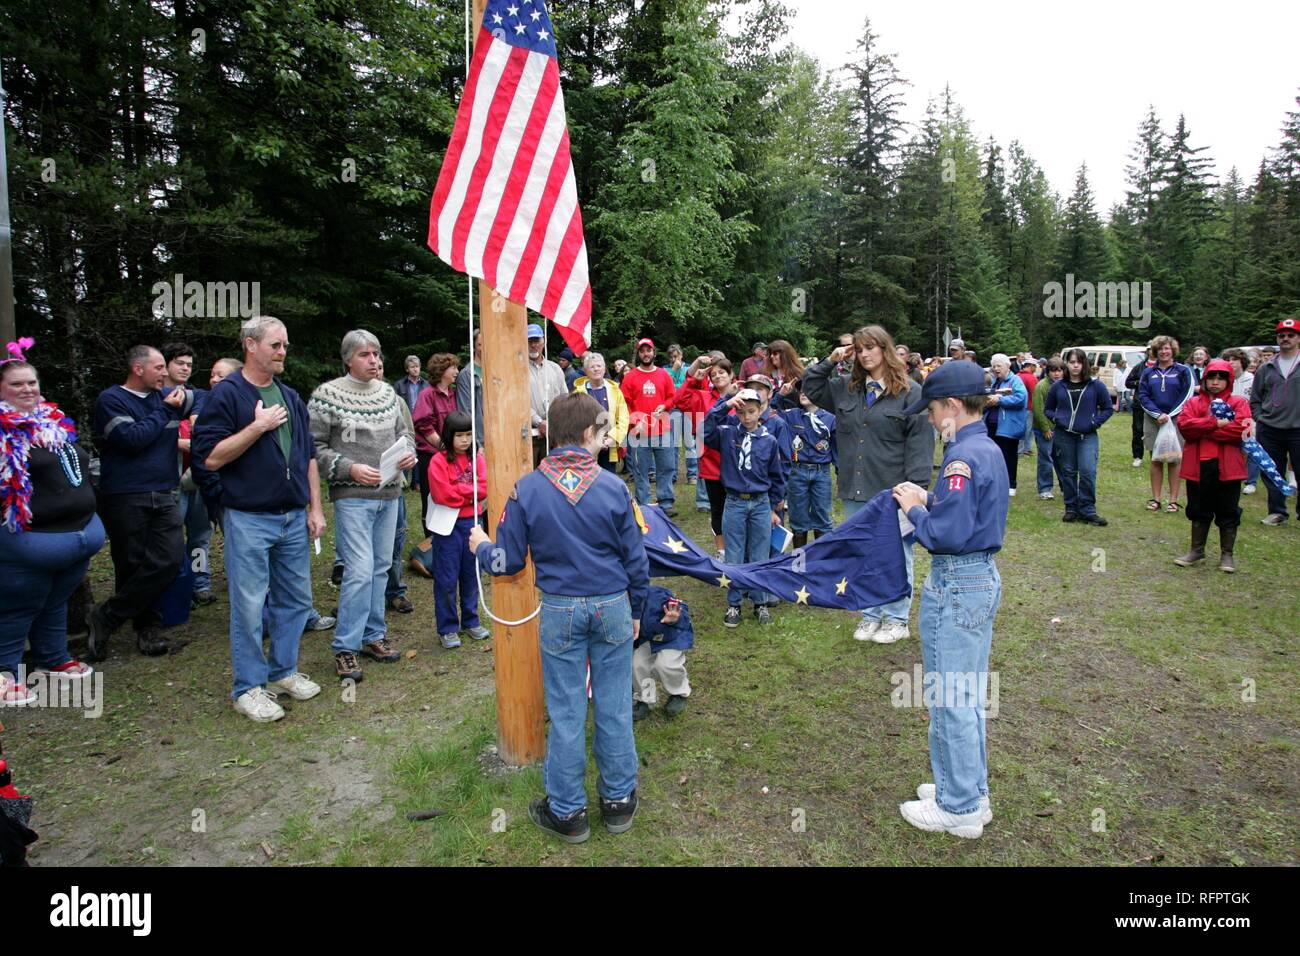 USA, United States of America, Alaska, Gustavus: 4th July, Independence day party in Gustavus, a village with 400 residents. Stock Photo